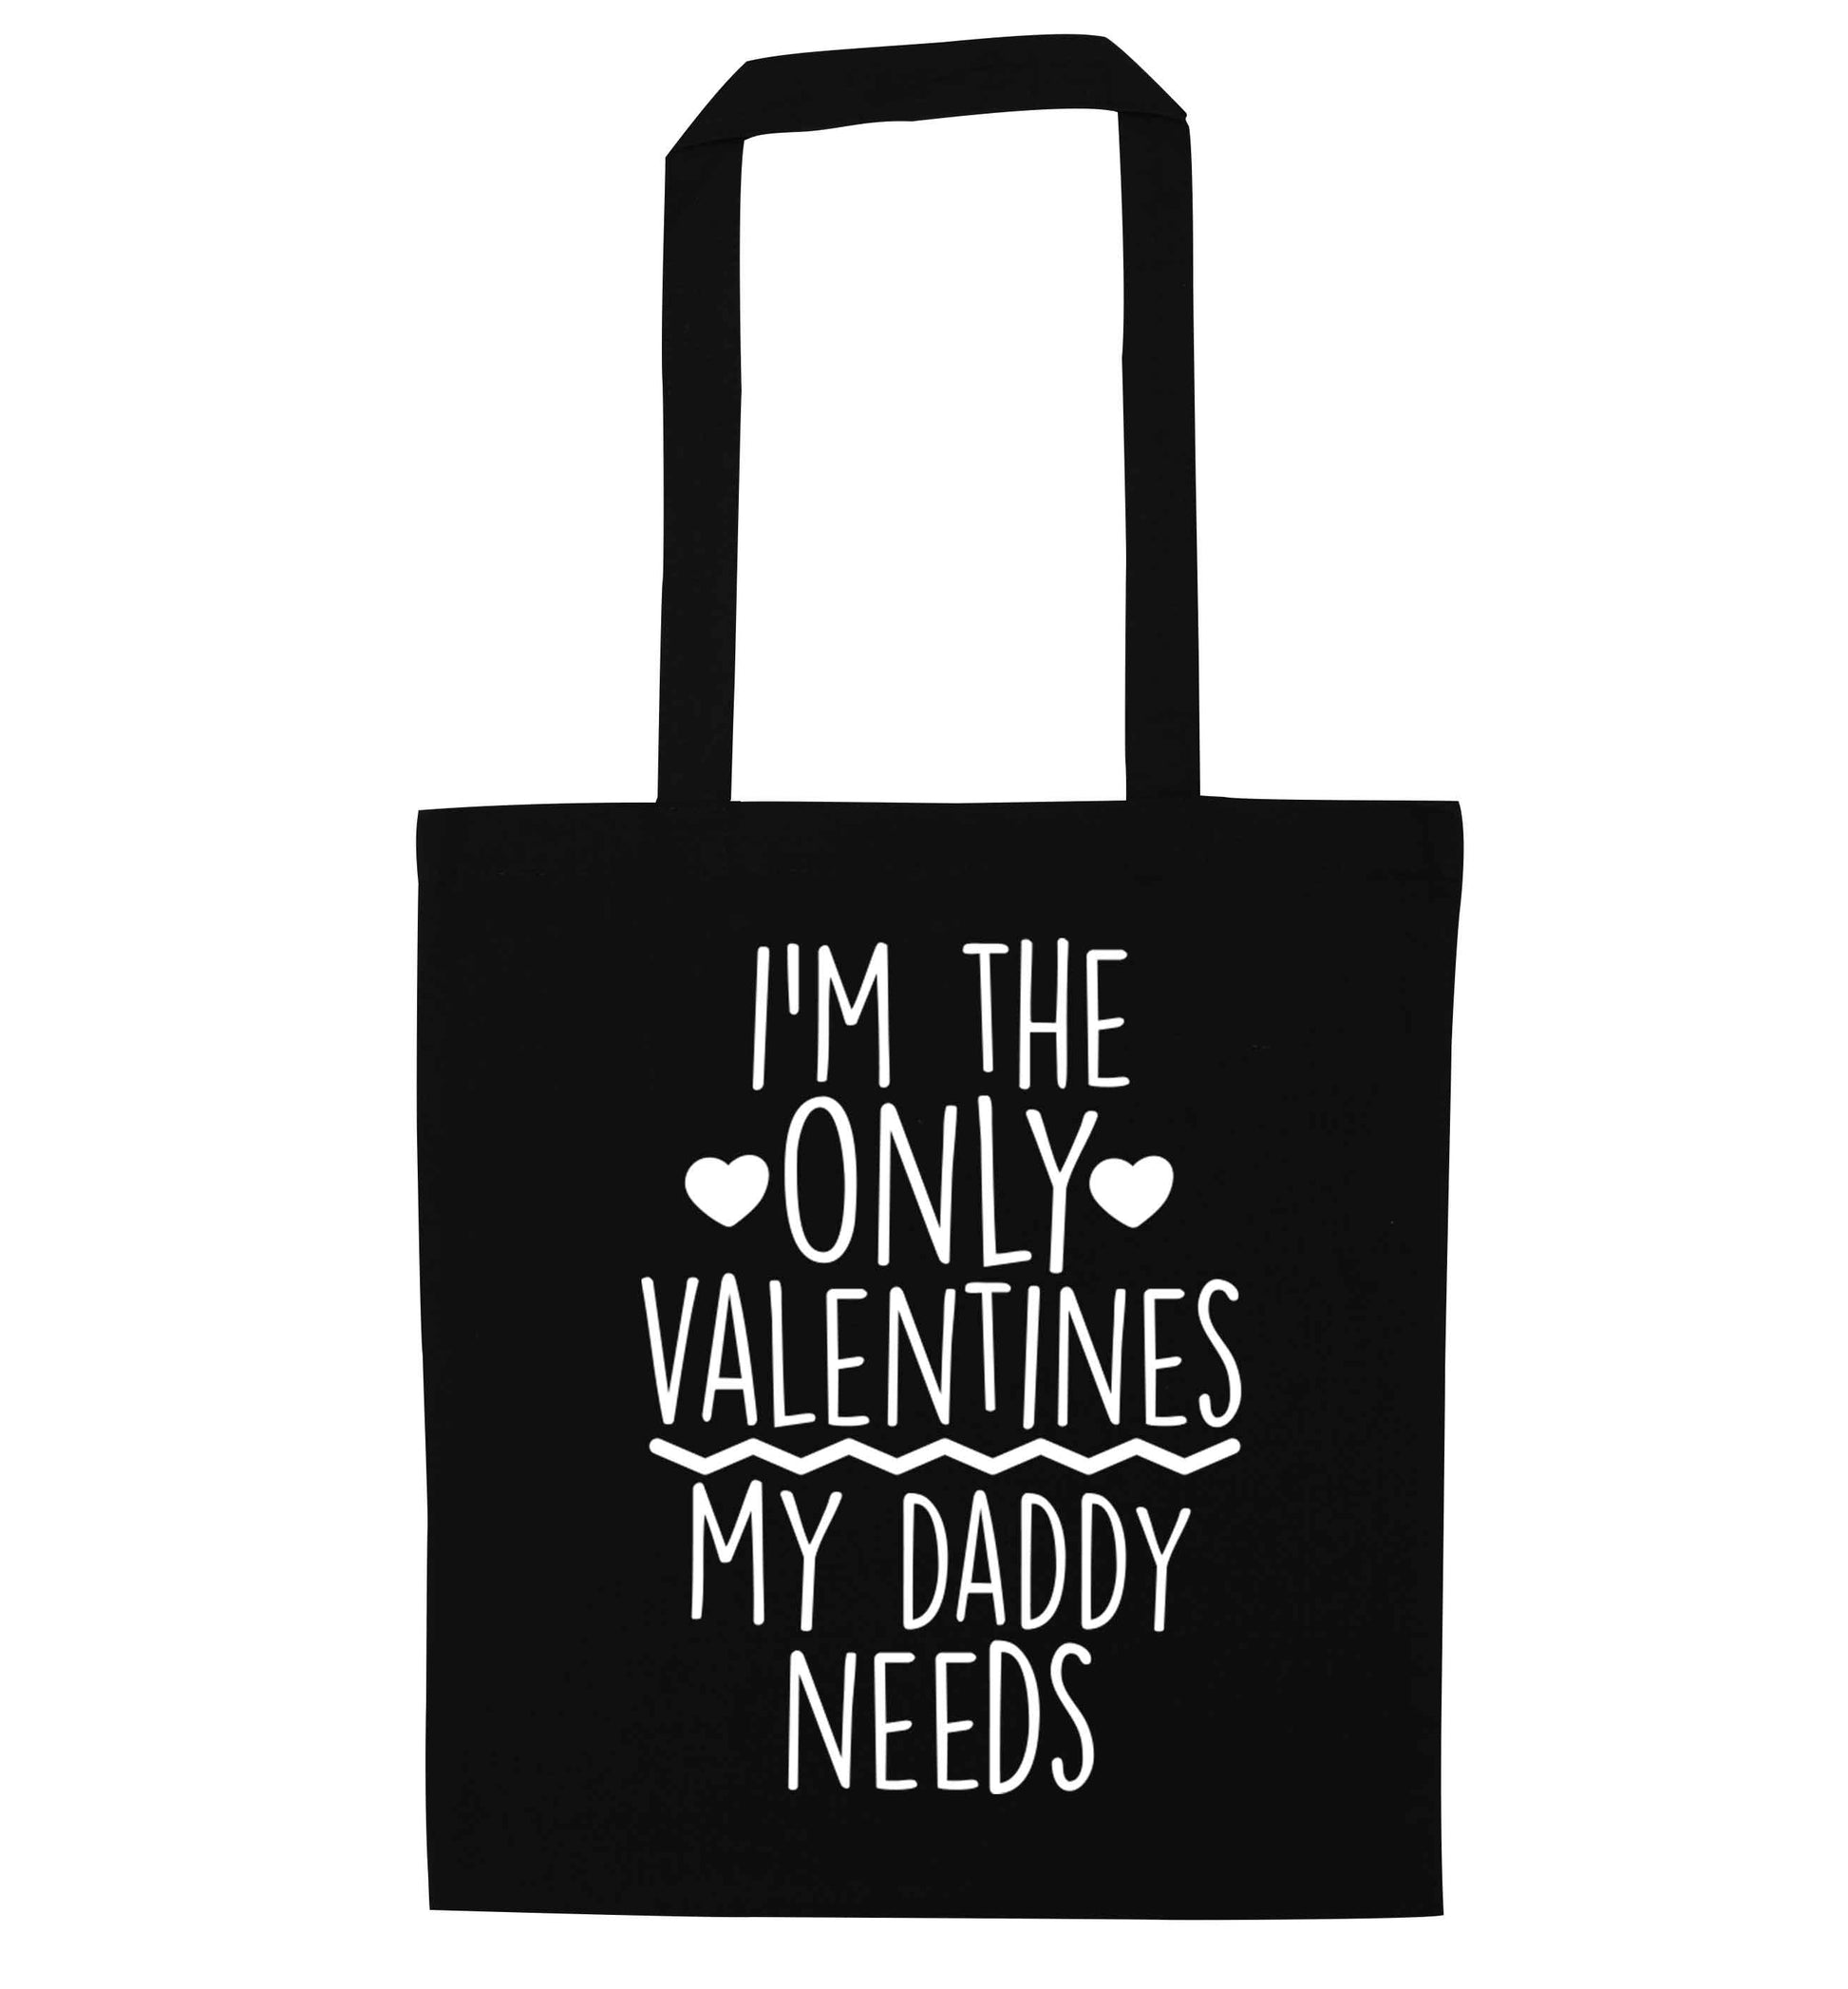 I'm the only valentines my daddy needs black tote bag